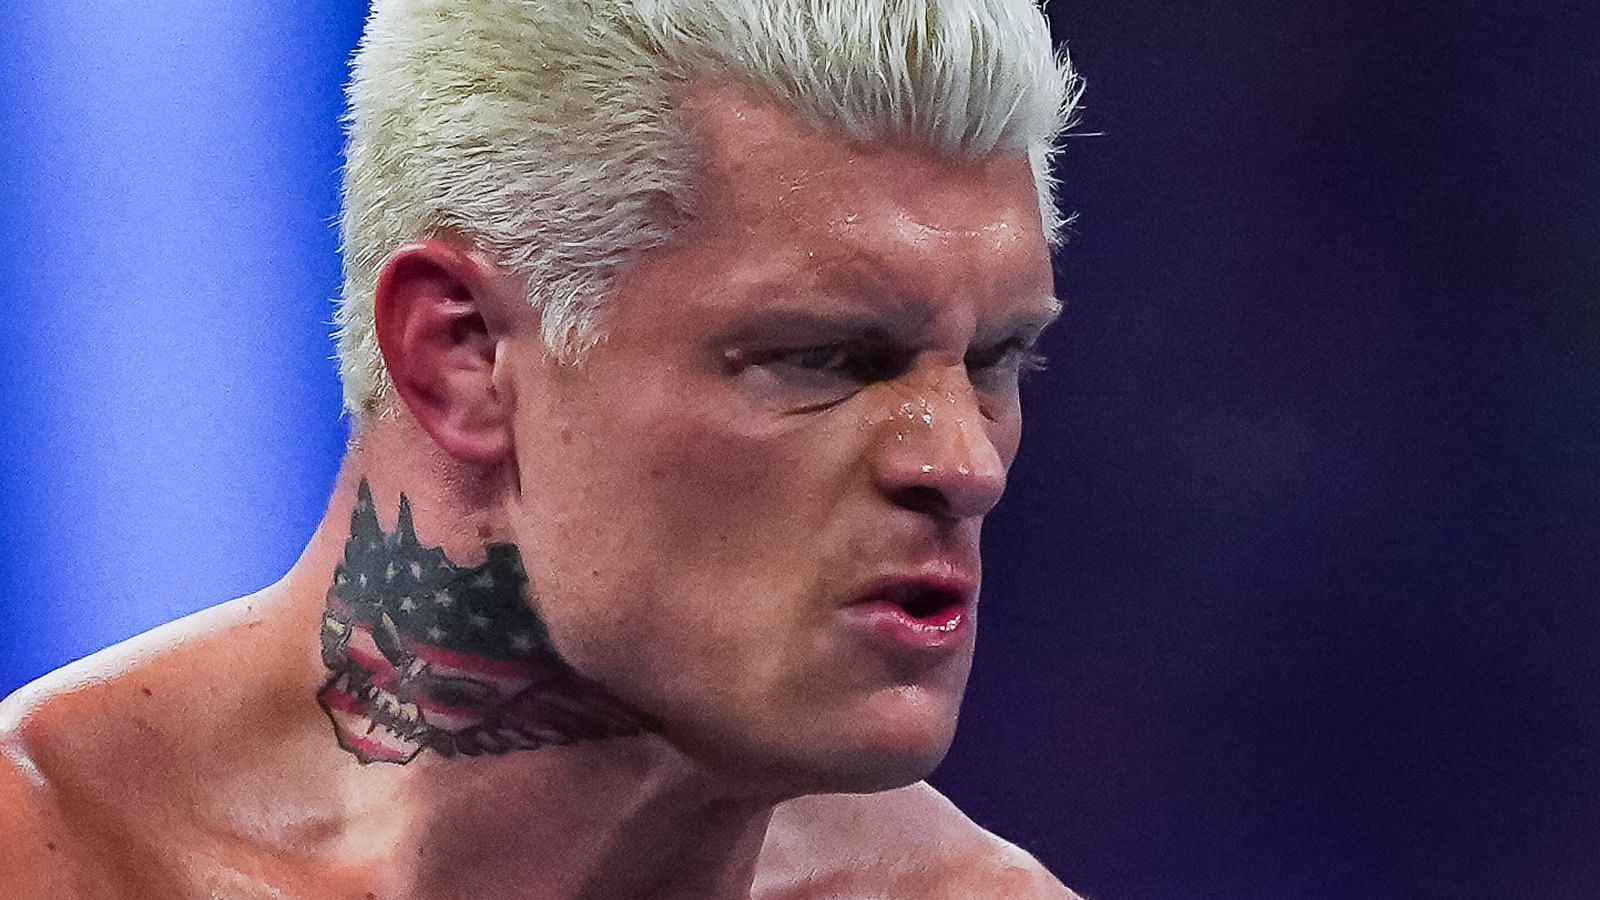 Cody Rhodes is one of the top Superstars in WWE today